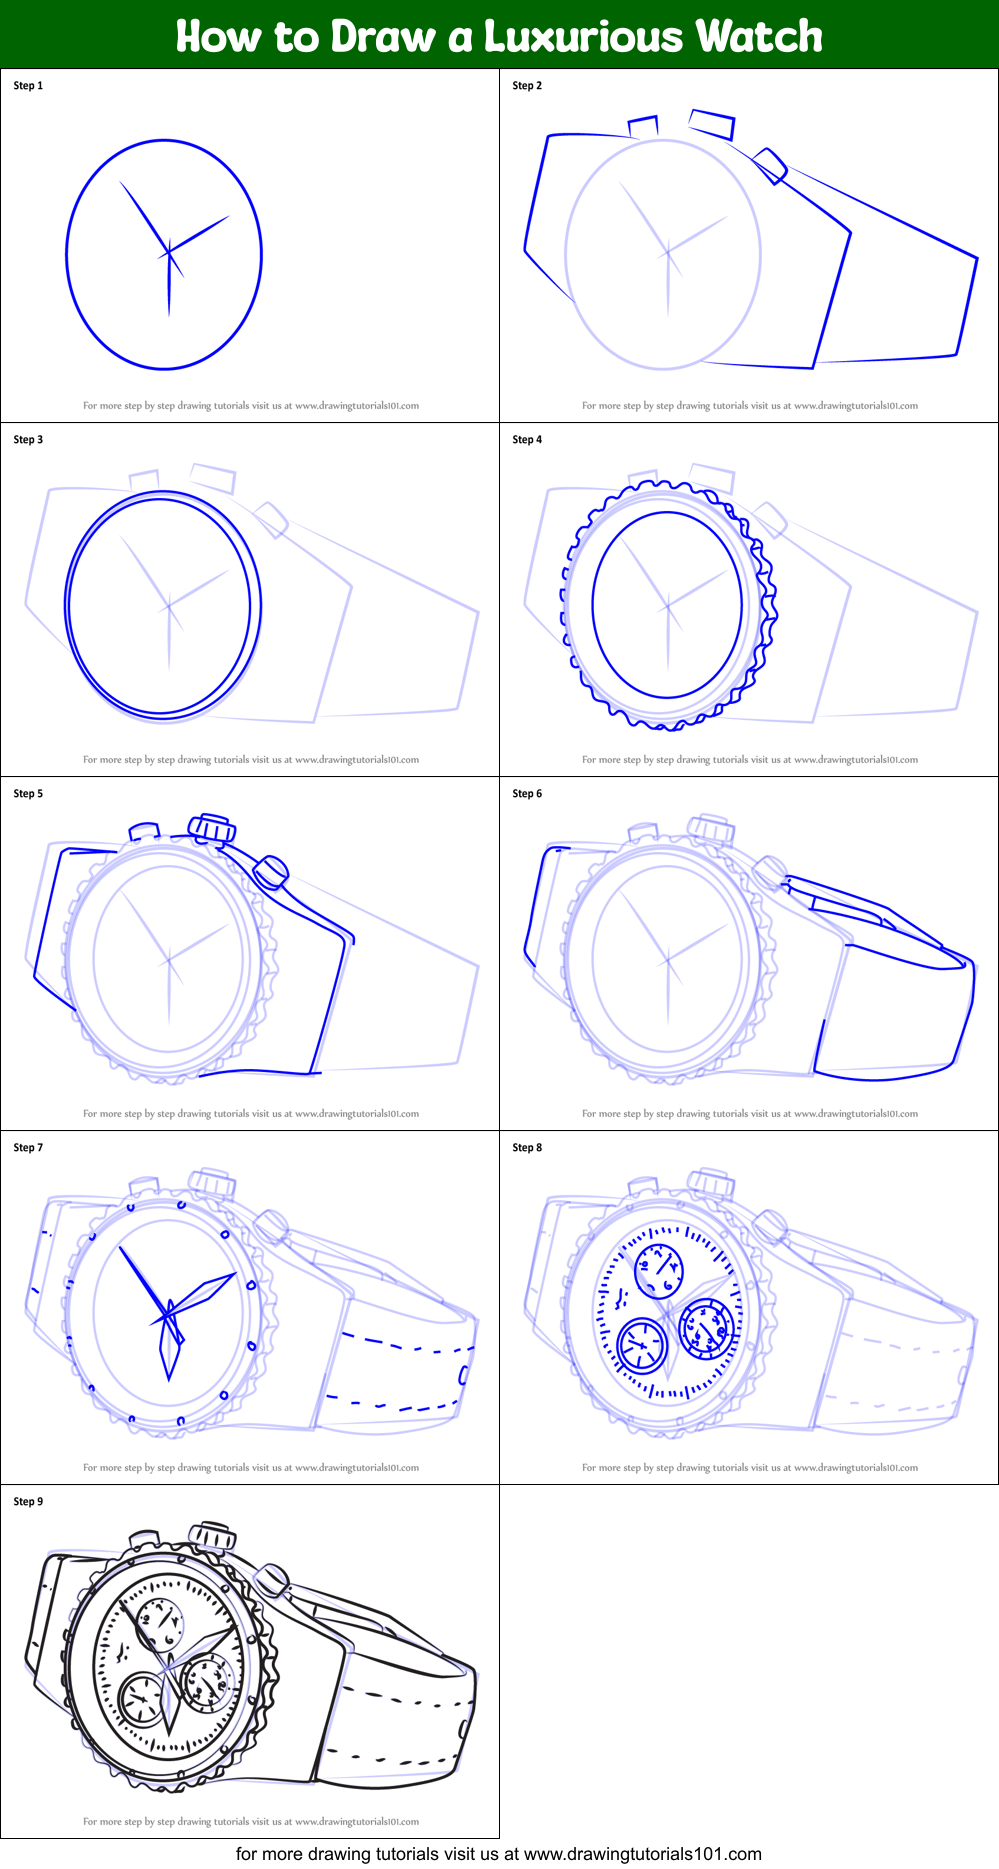 How to Draw a Luxurious Watch printable step by step drawing sheet